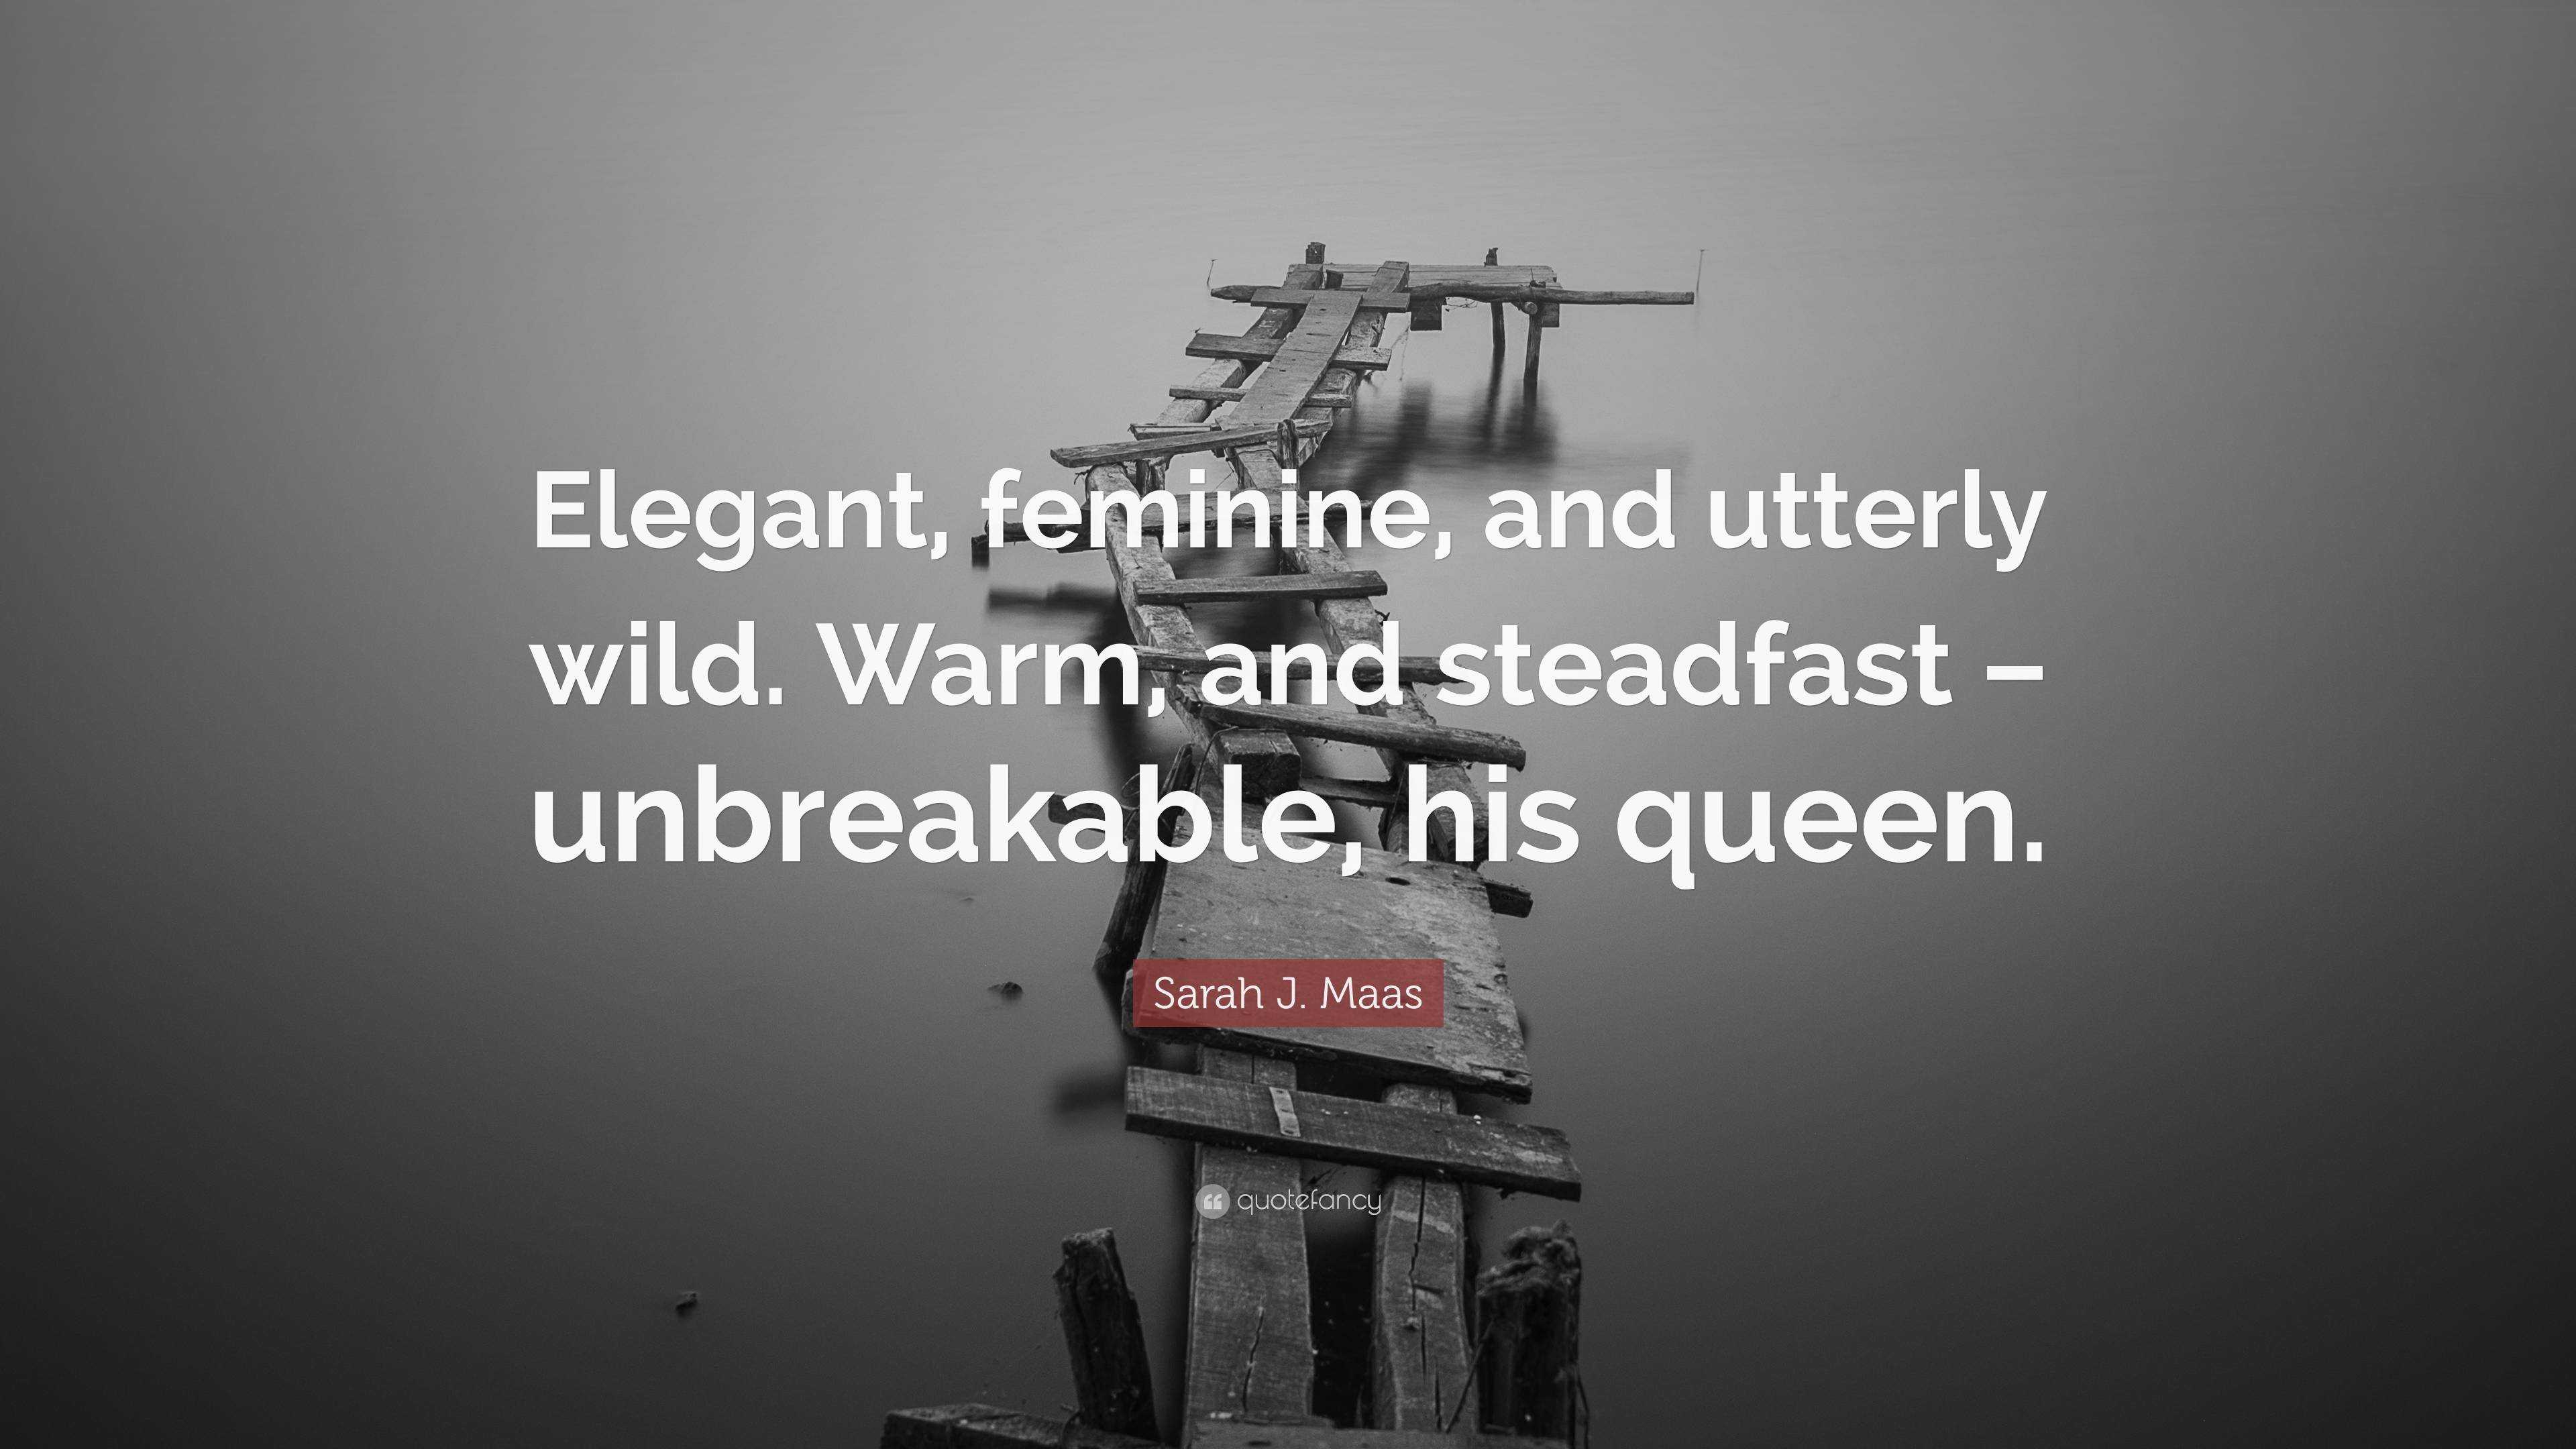 Sarah J. Maas Quote: “Elegant, feminine, and utterly wild. Warm, and  steadfast – unbreakable, his queen.”